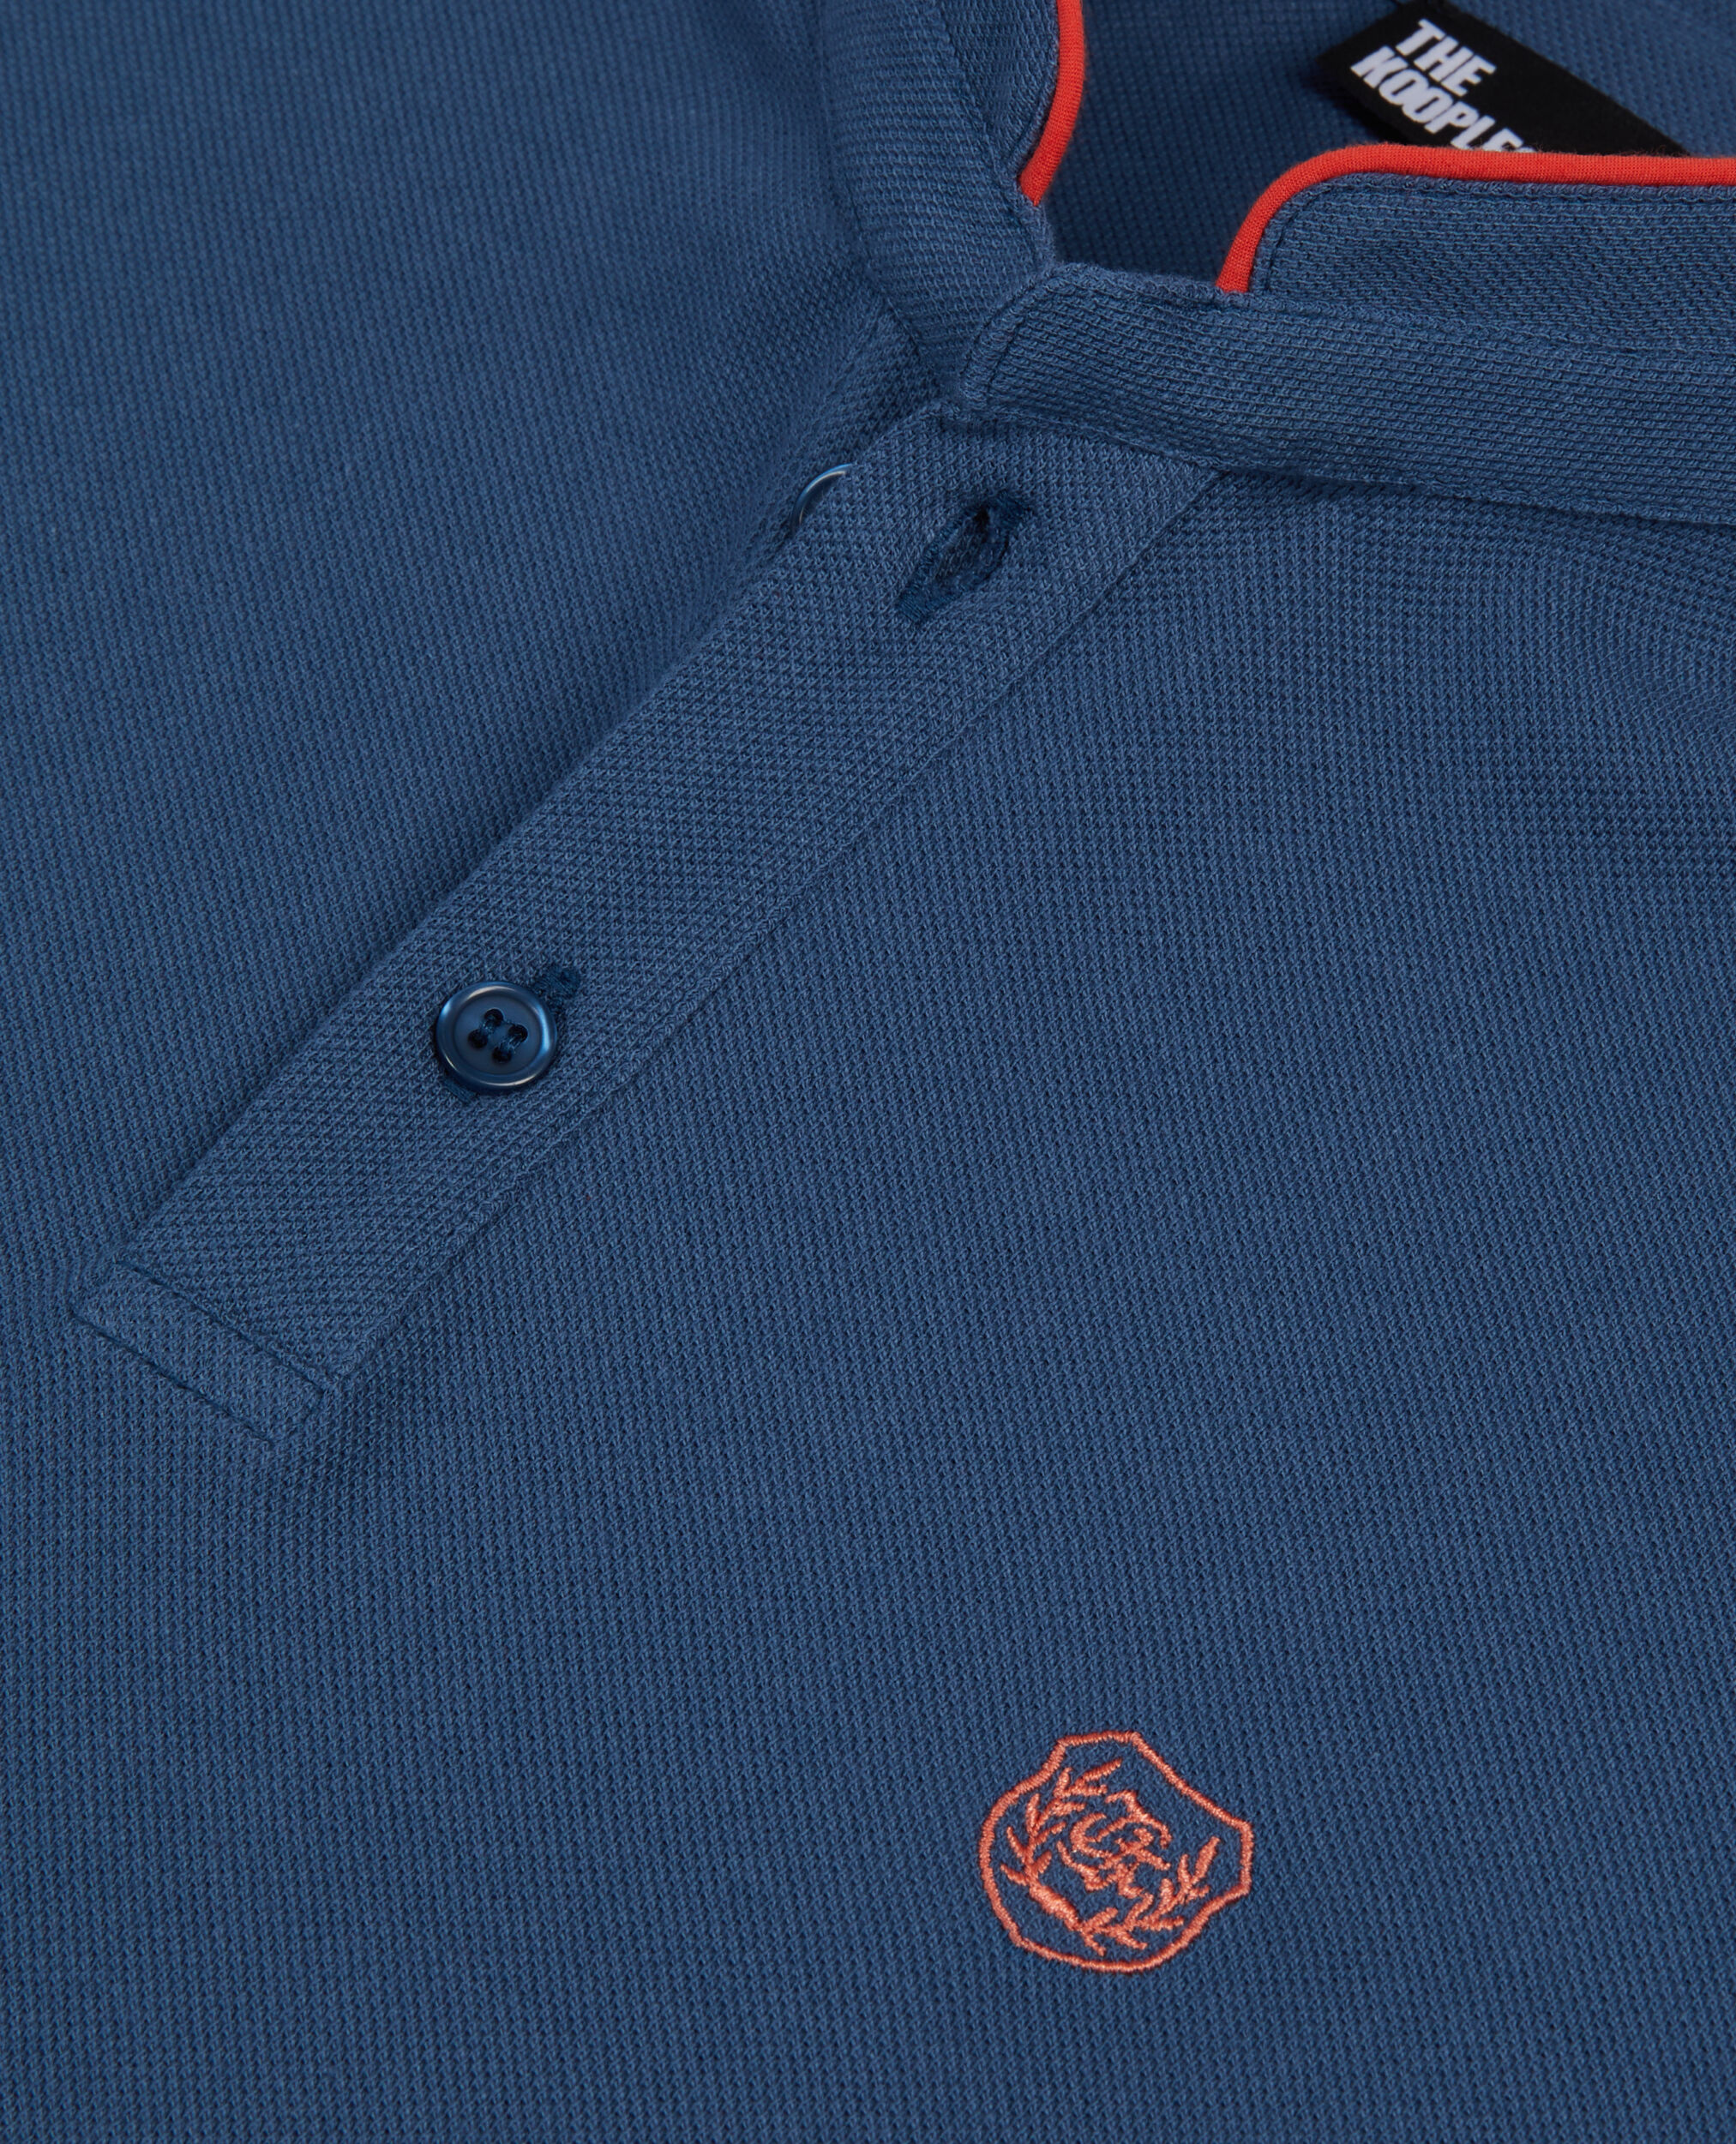 Camisa polo azul real piqué algodón, MIDDLE NAVY, hi-res image number null